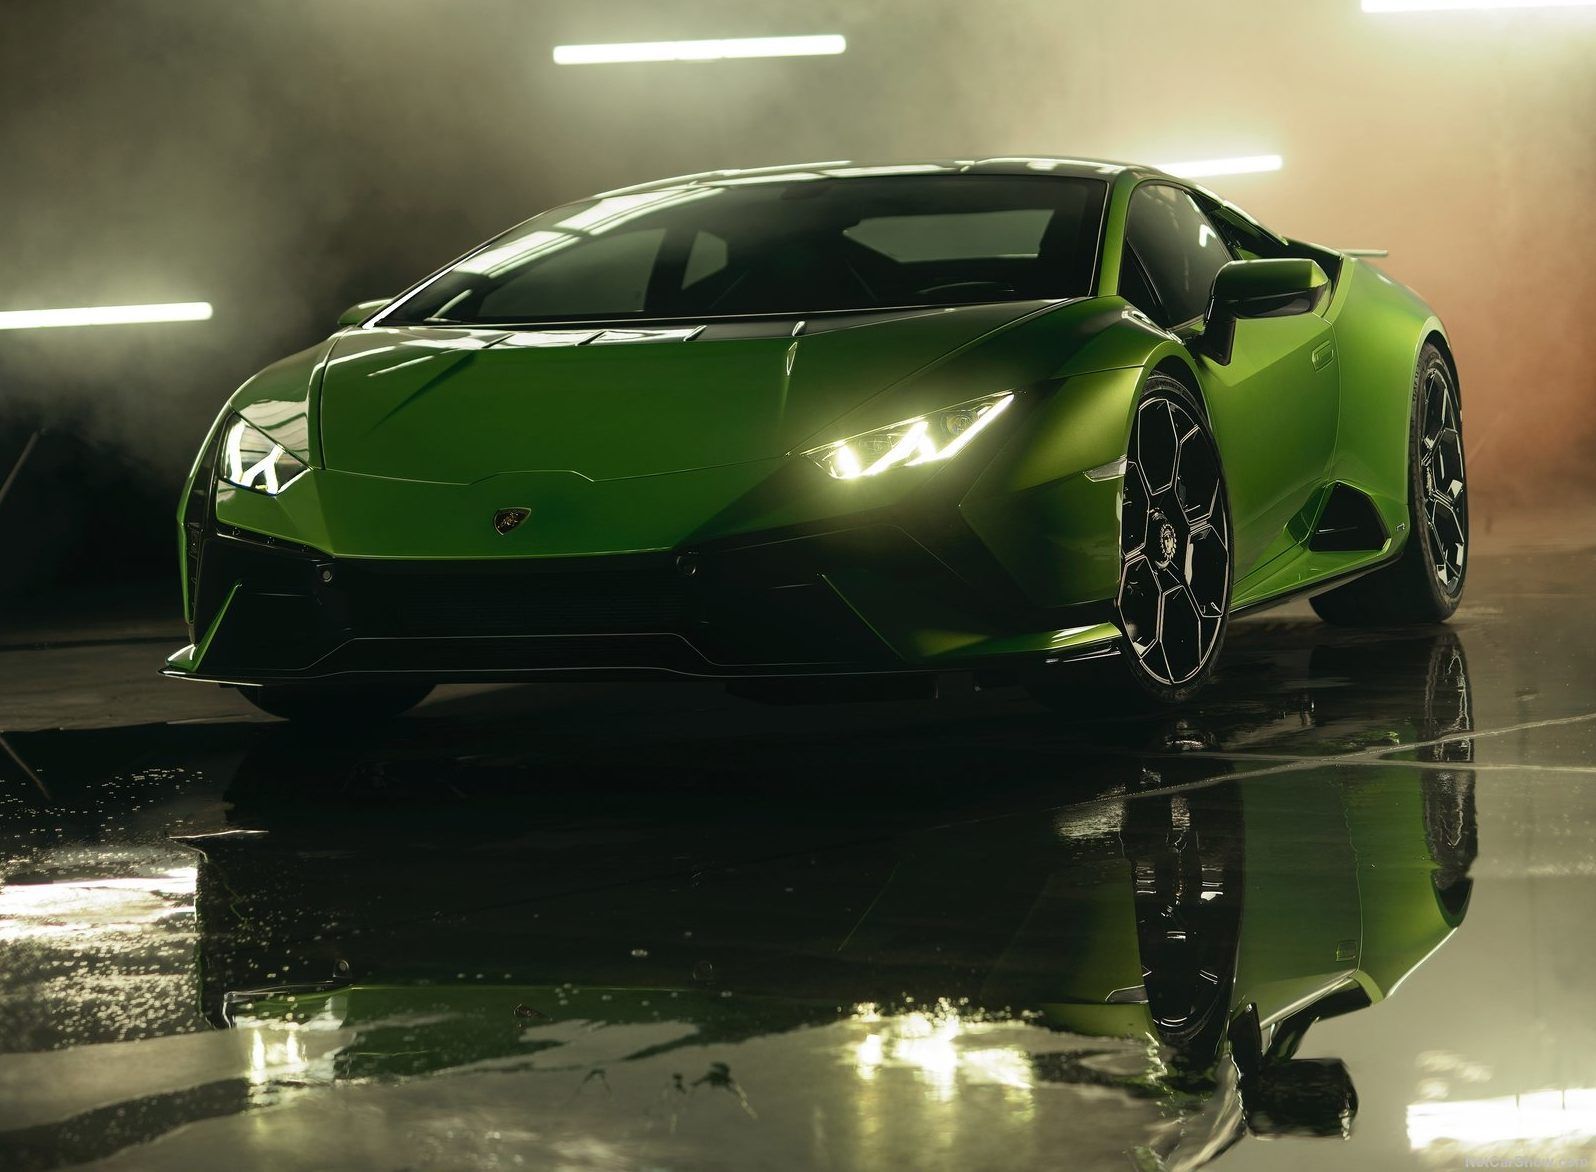 Lamborghini's 631-HP Huracan Tecnica is built for road and track